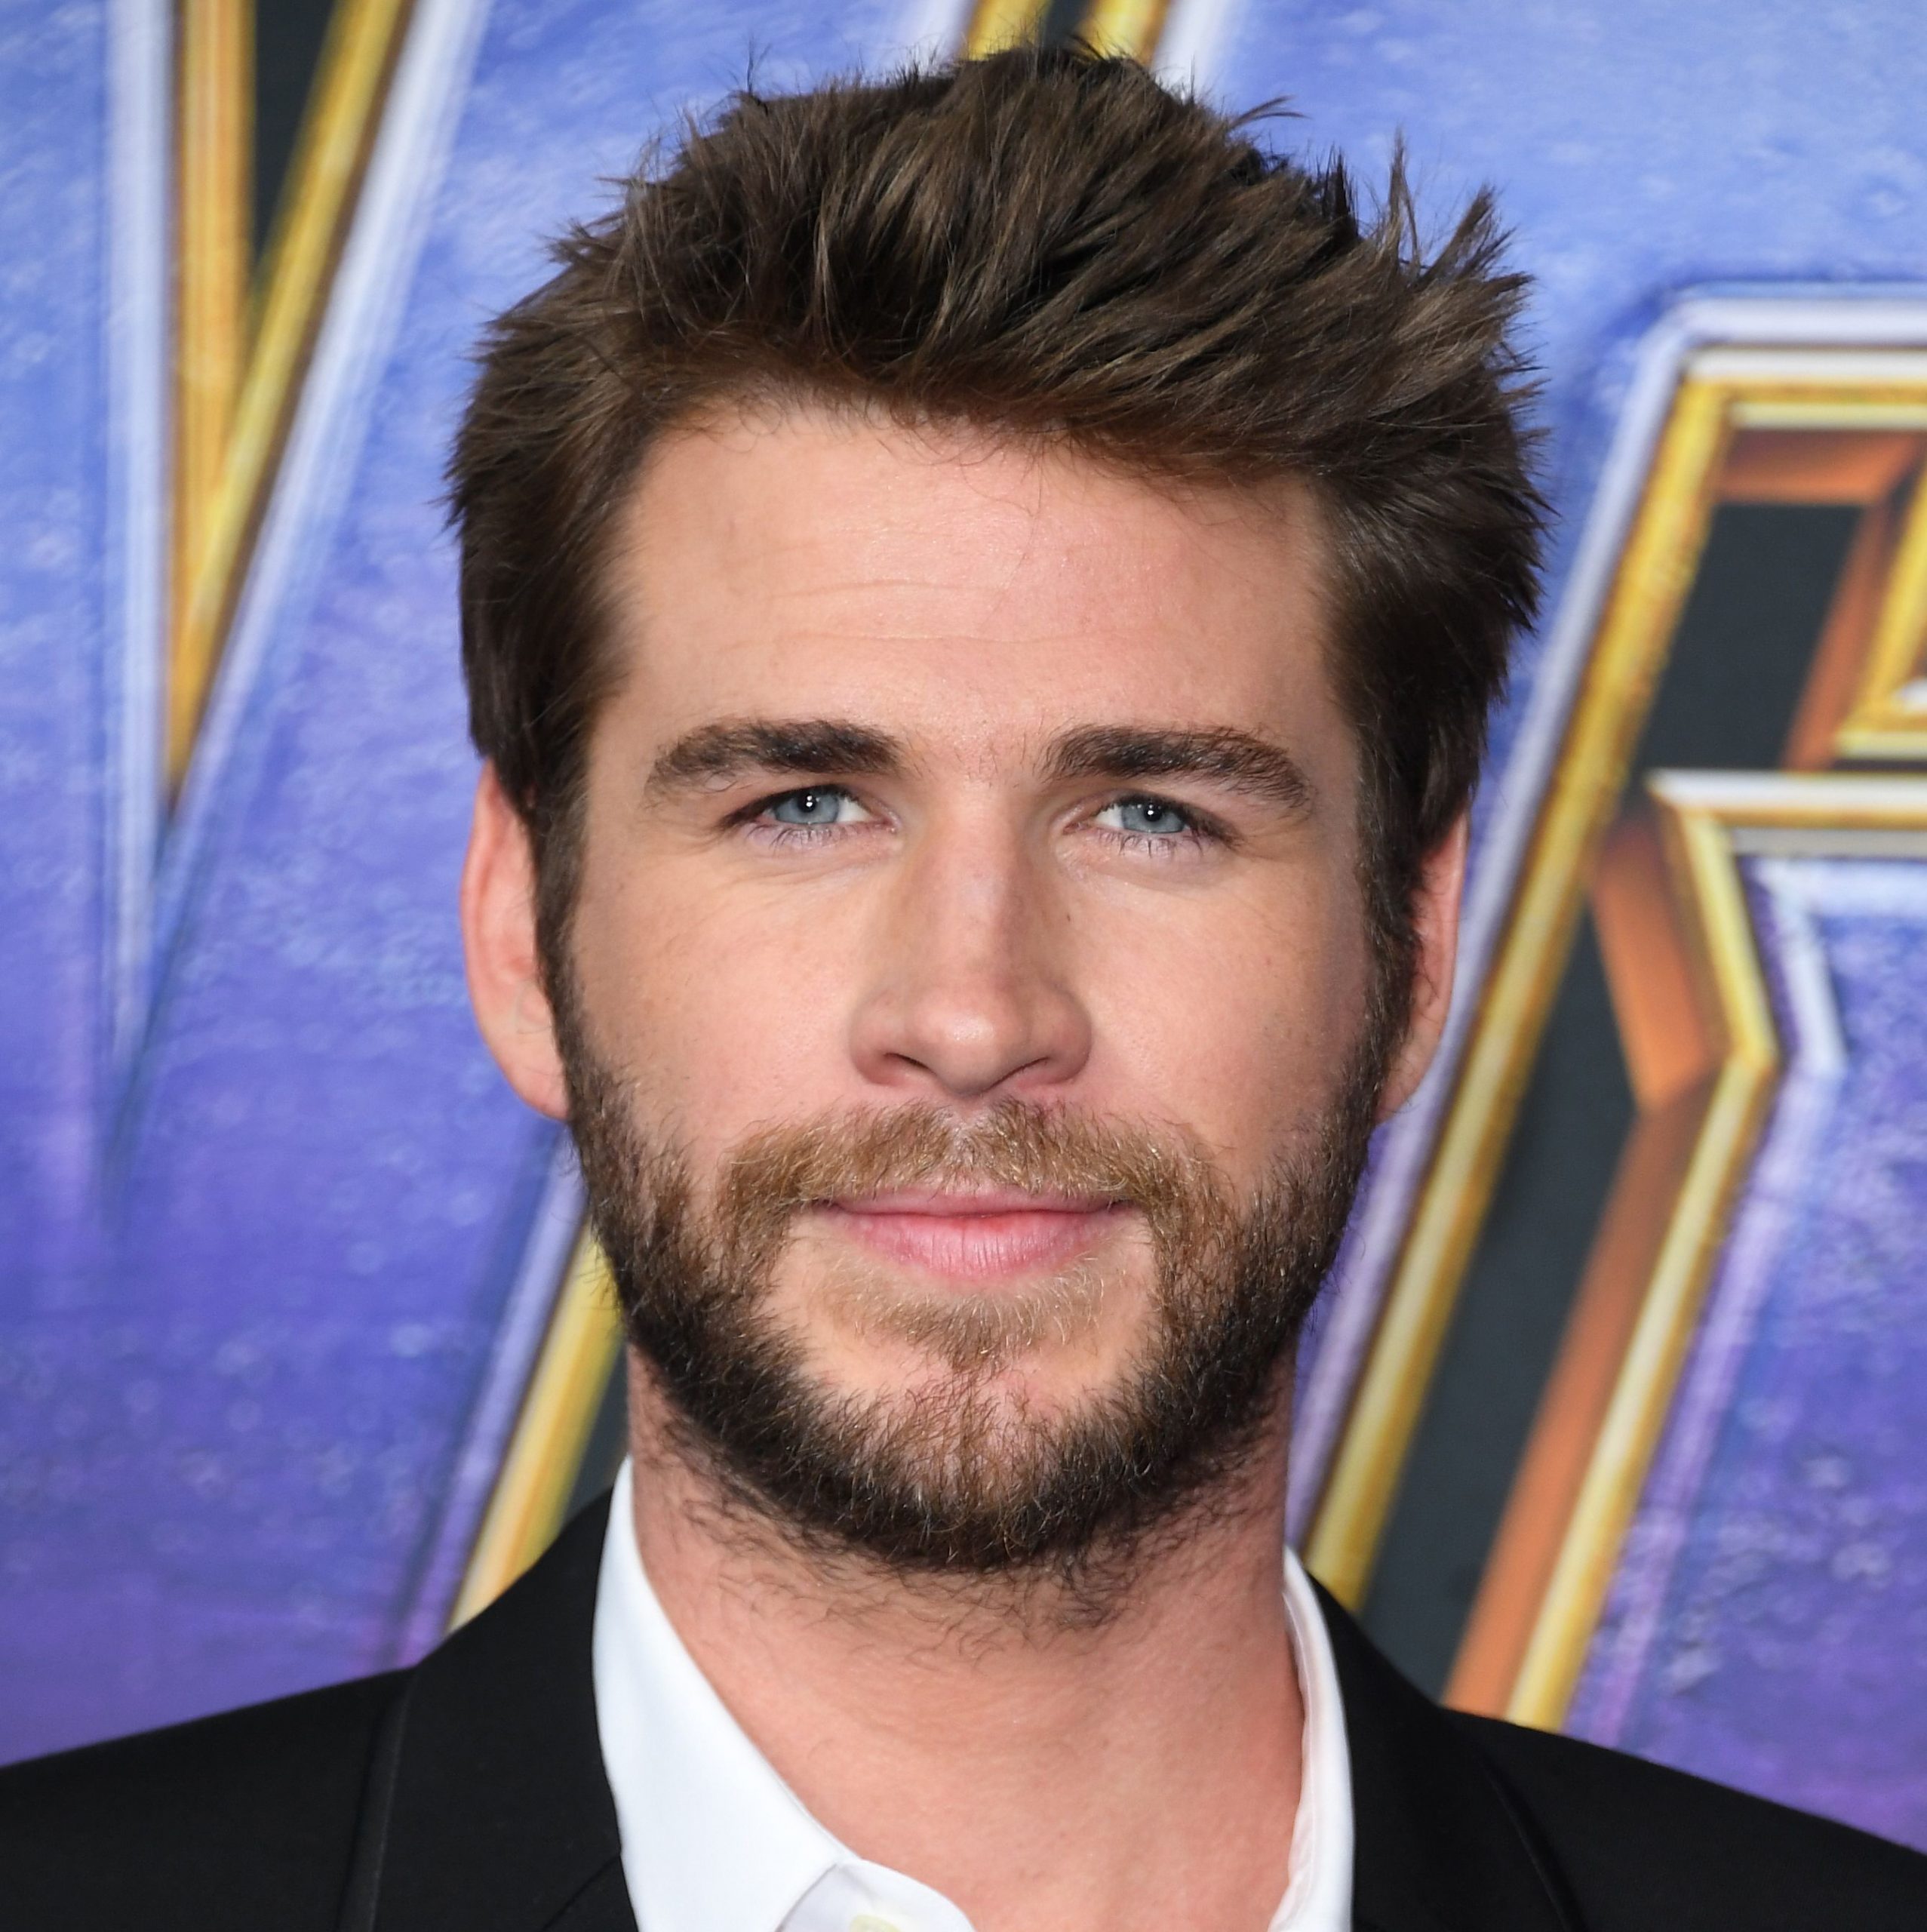 It turns out that Liam Hemsworth was almost cast as The Witcher back in 2018